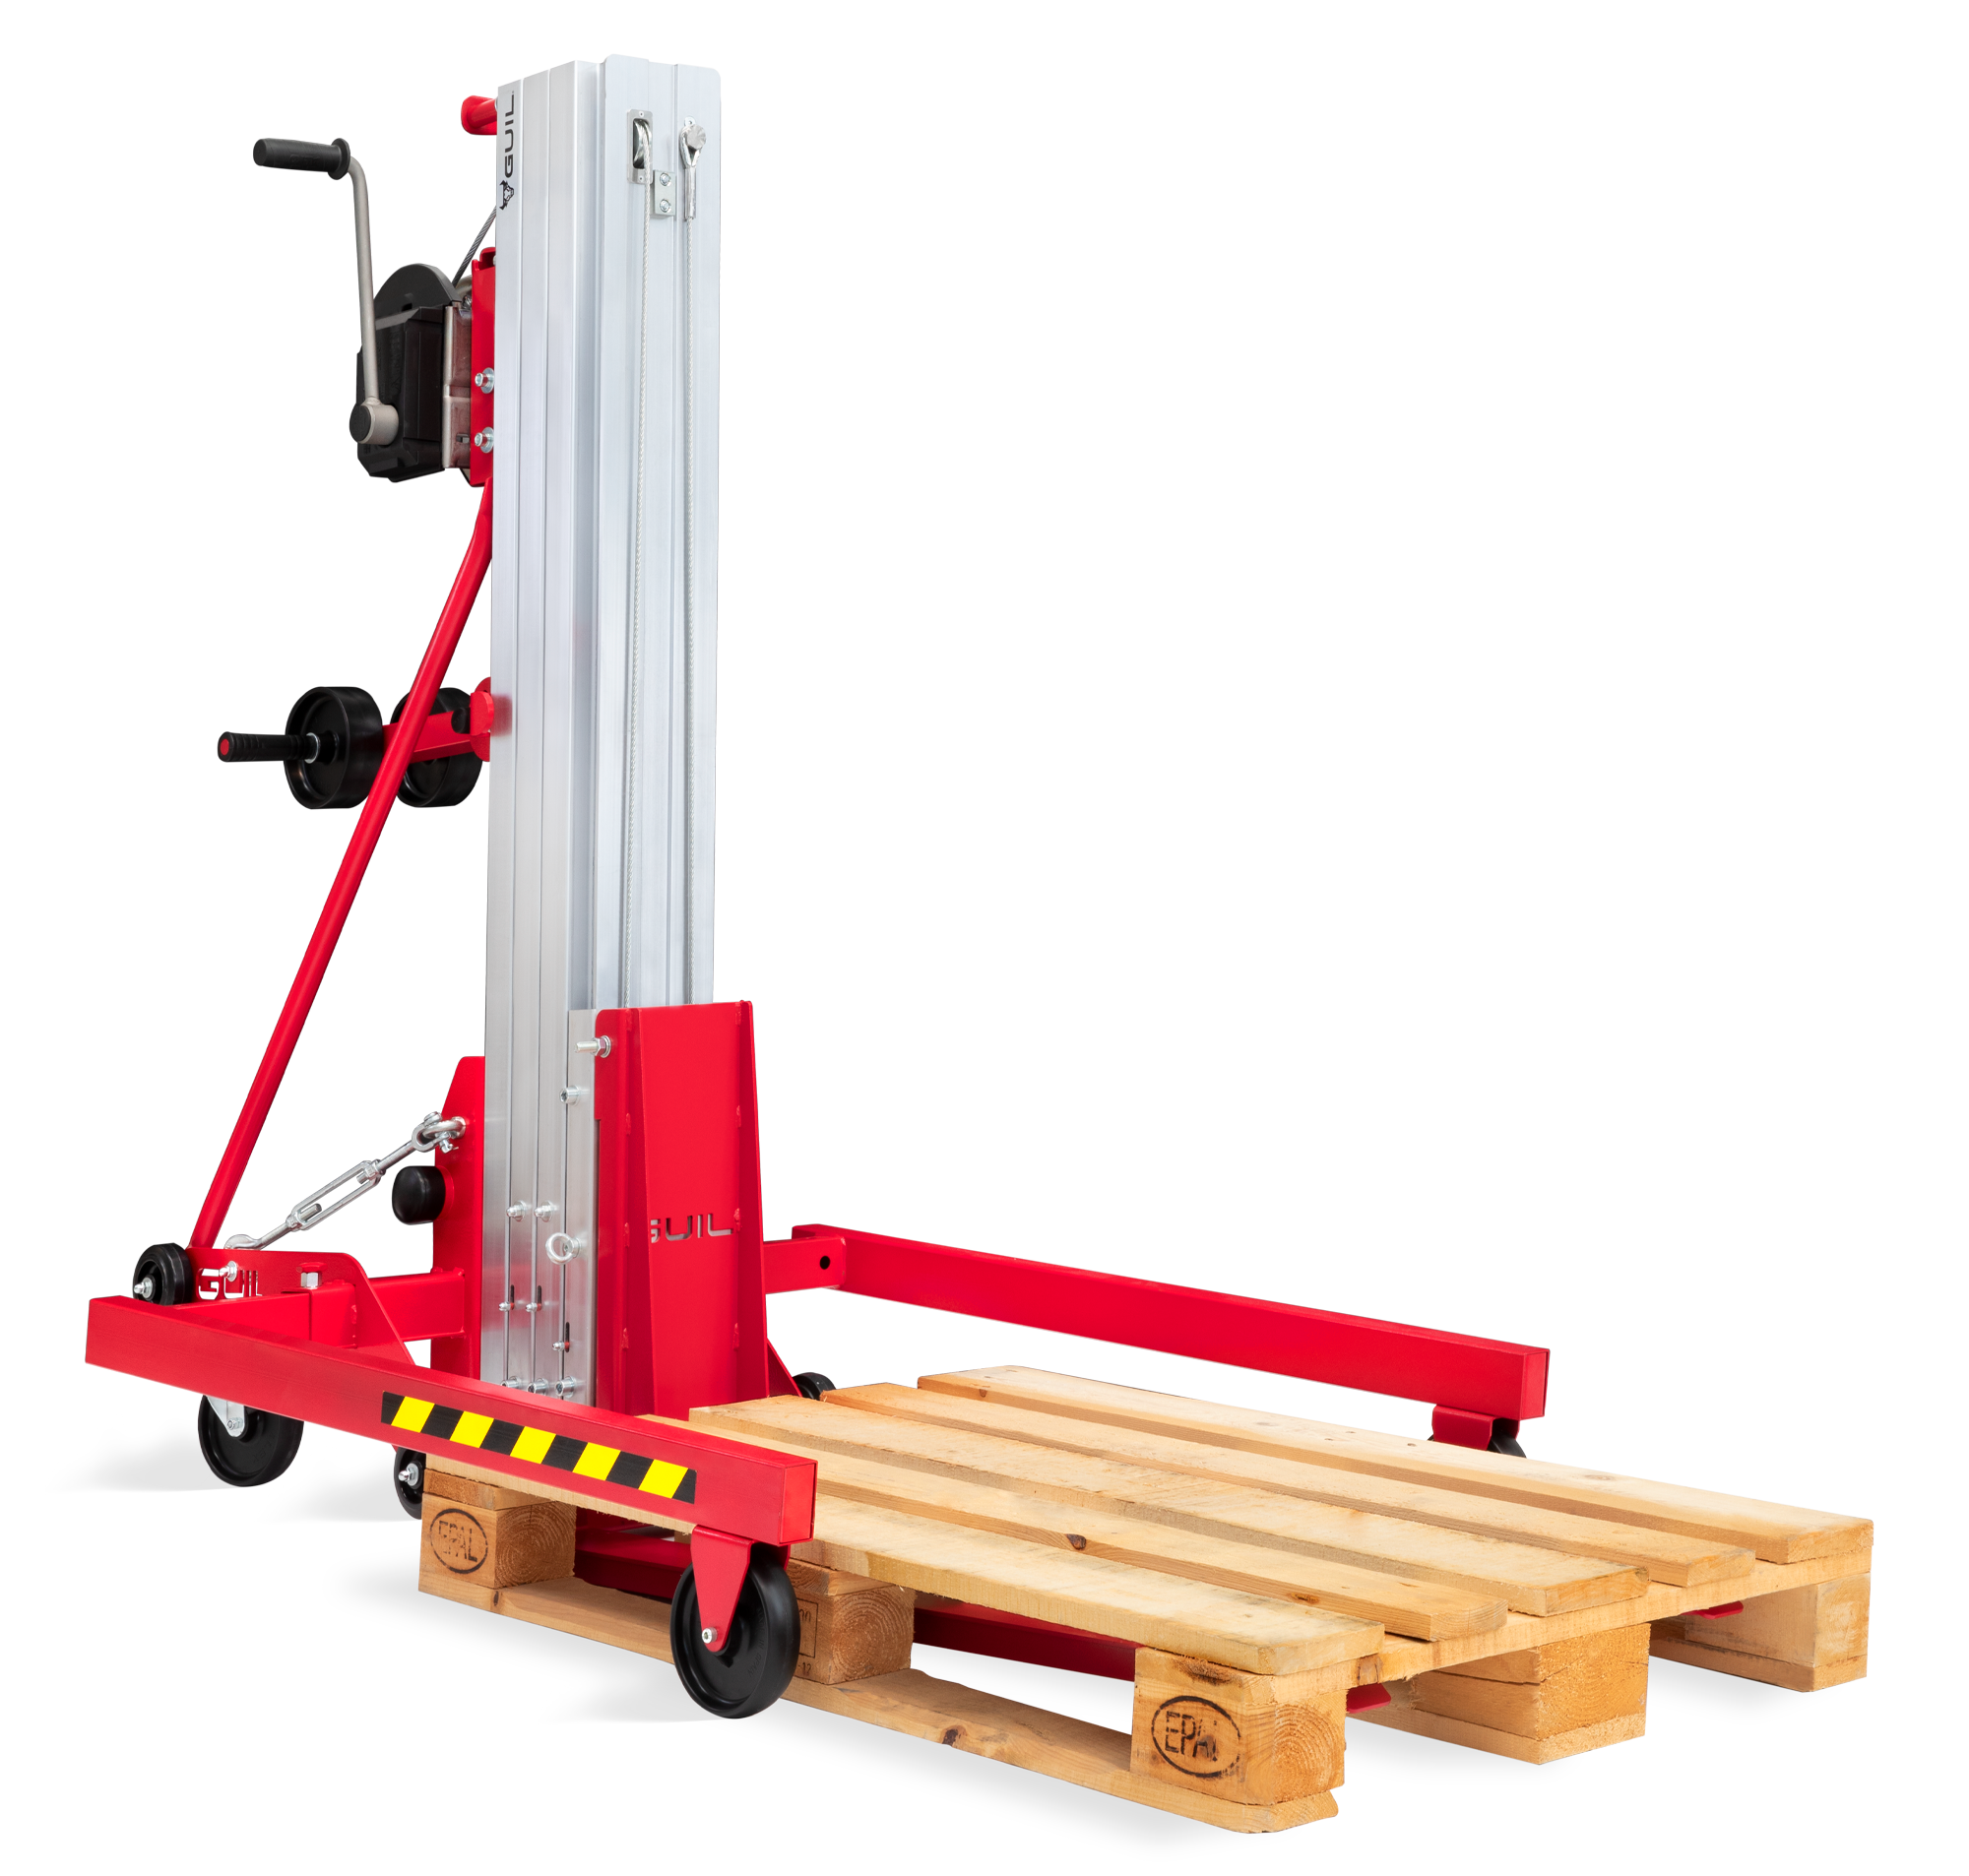 Manual pallet lifter to lift loads of up to 200 kg - TORO E-501/C